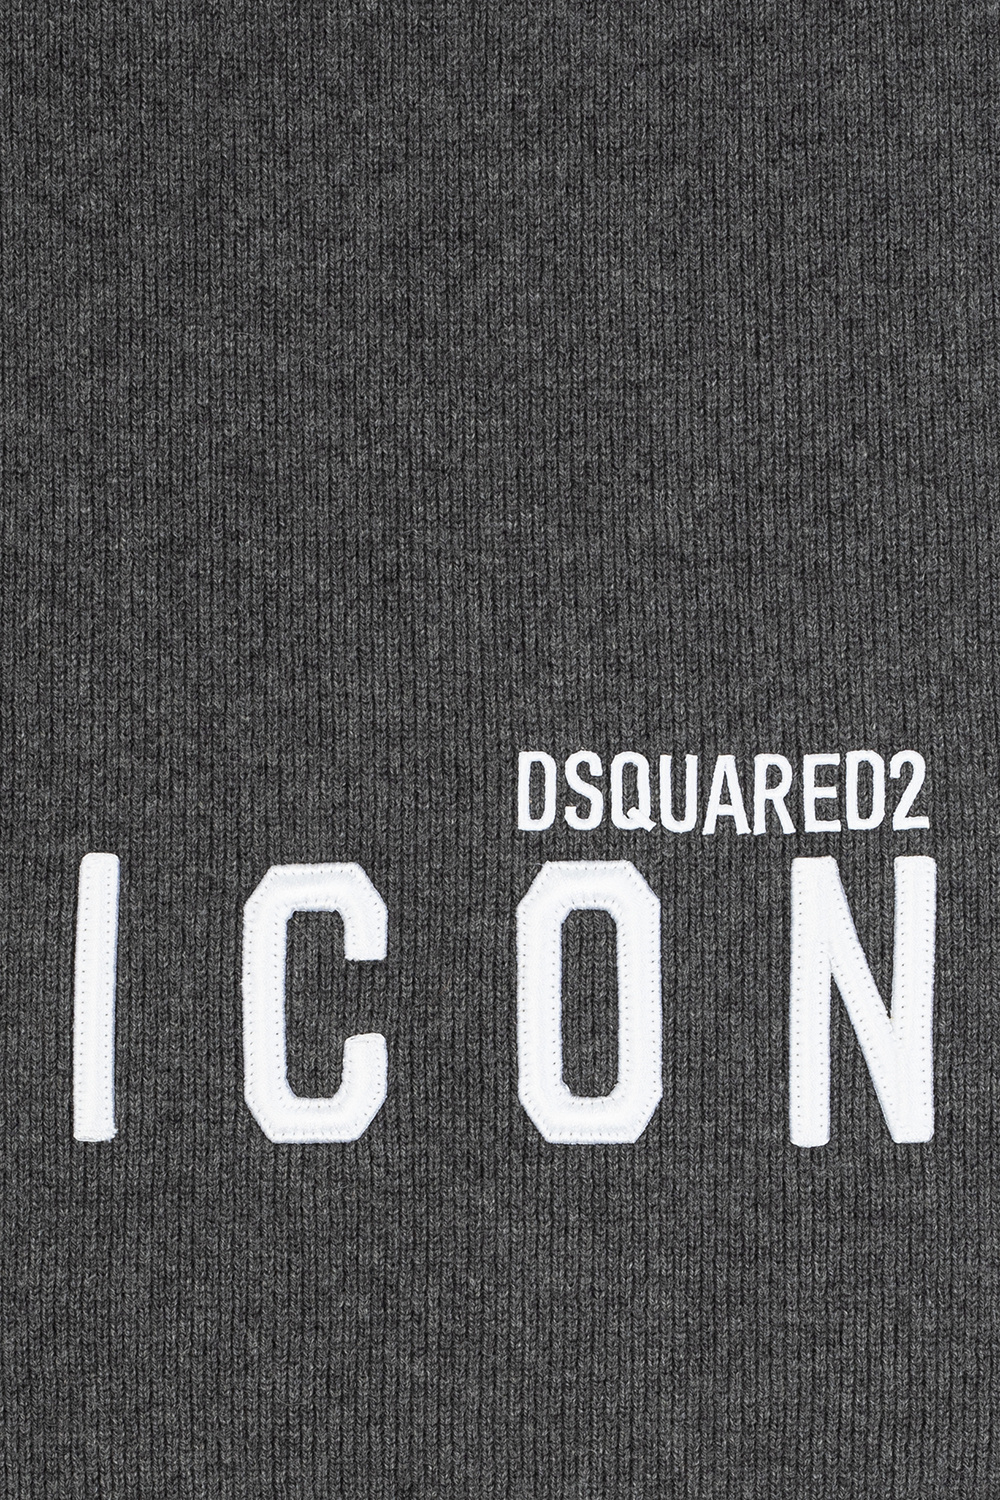 Dsquared2 COLLAR inches US